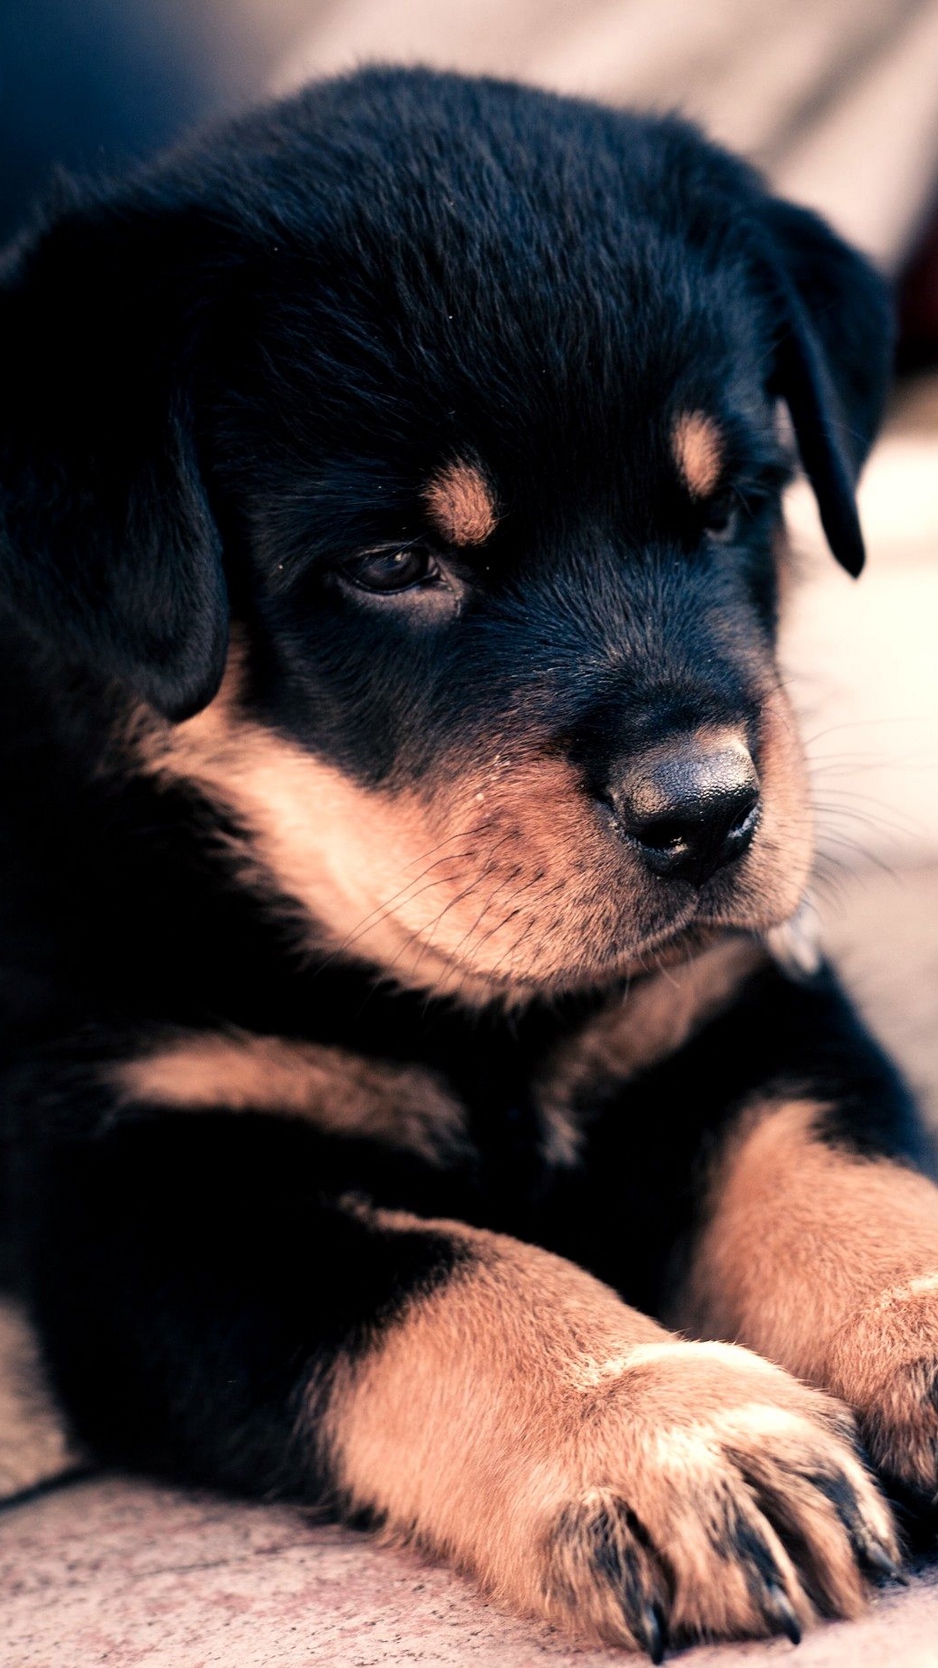 Wallpaper Puppy, Rottweiler, Cute, Baby - Cute Puppies Wallpapers For Iphone - HD Wallpaper 